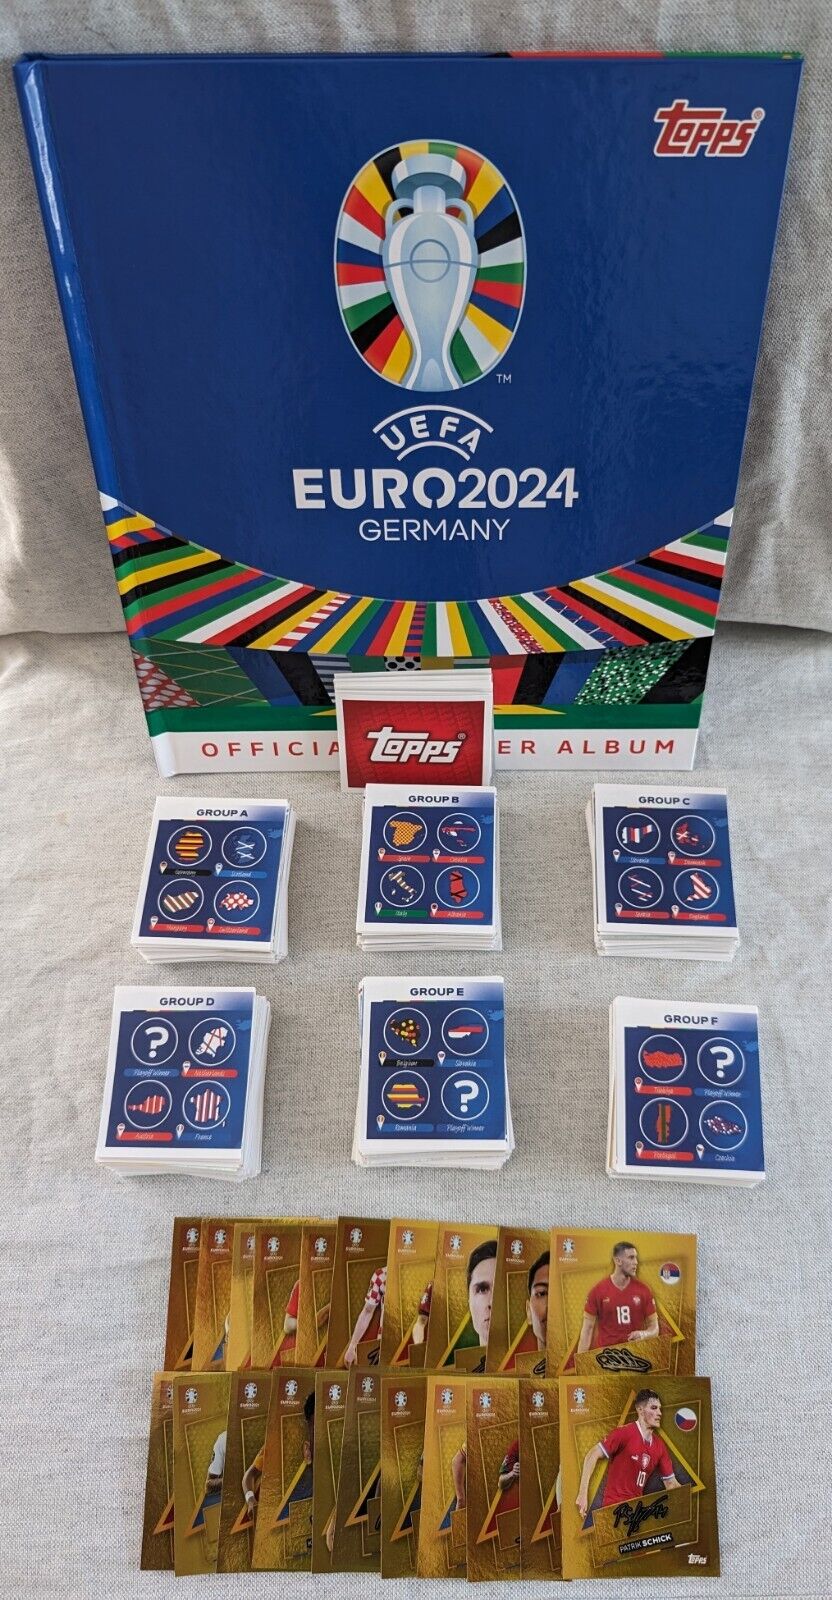 TOPPS EURO 2024 Ger - Nearly-Complete, 500 Stickers + Hardcover Sticker Album -